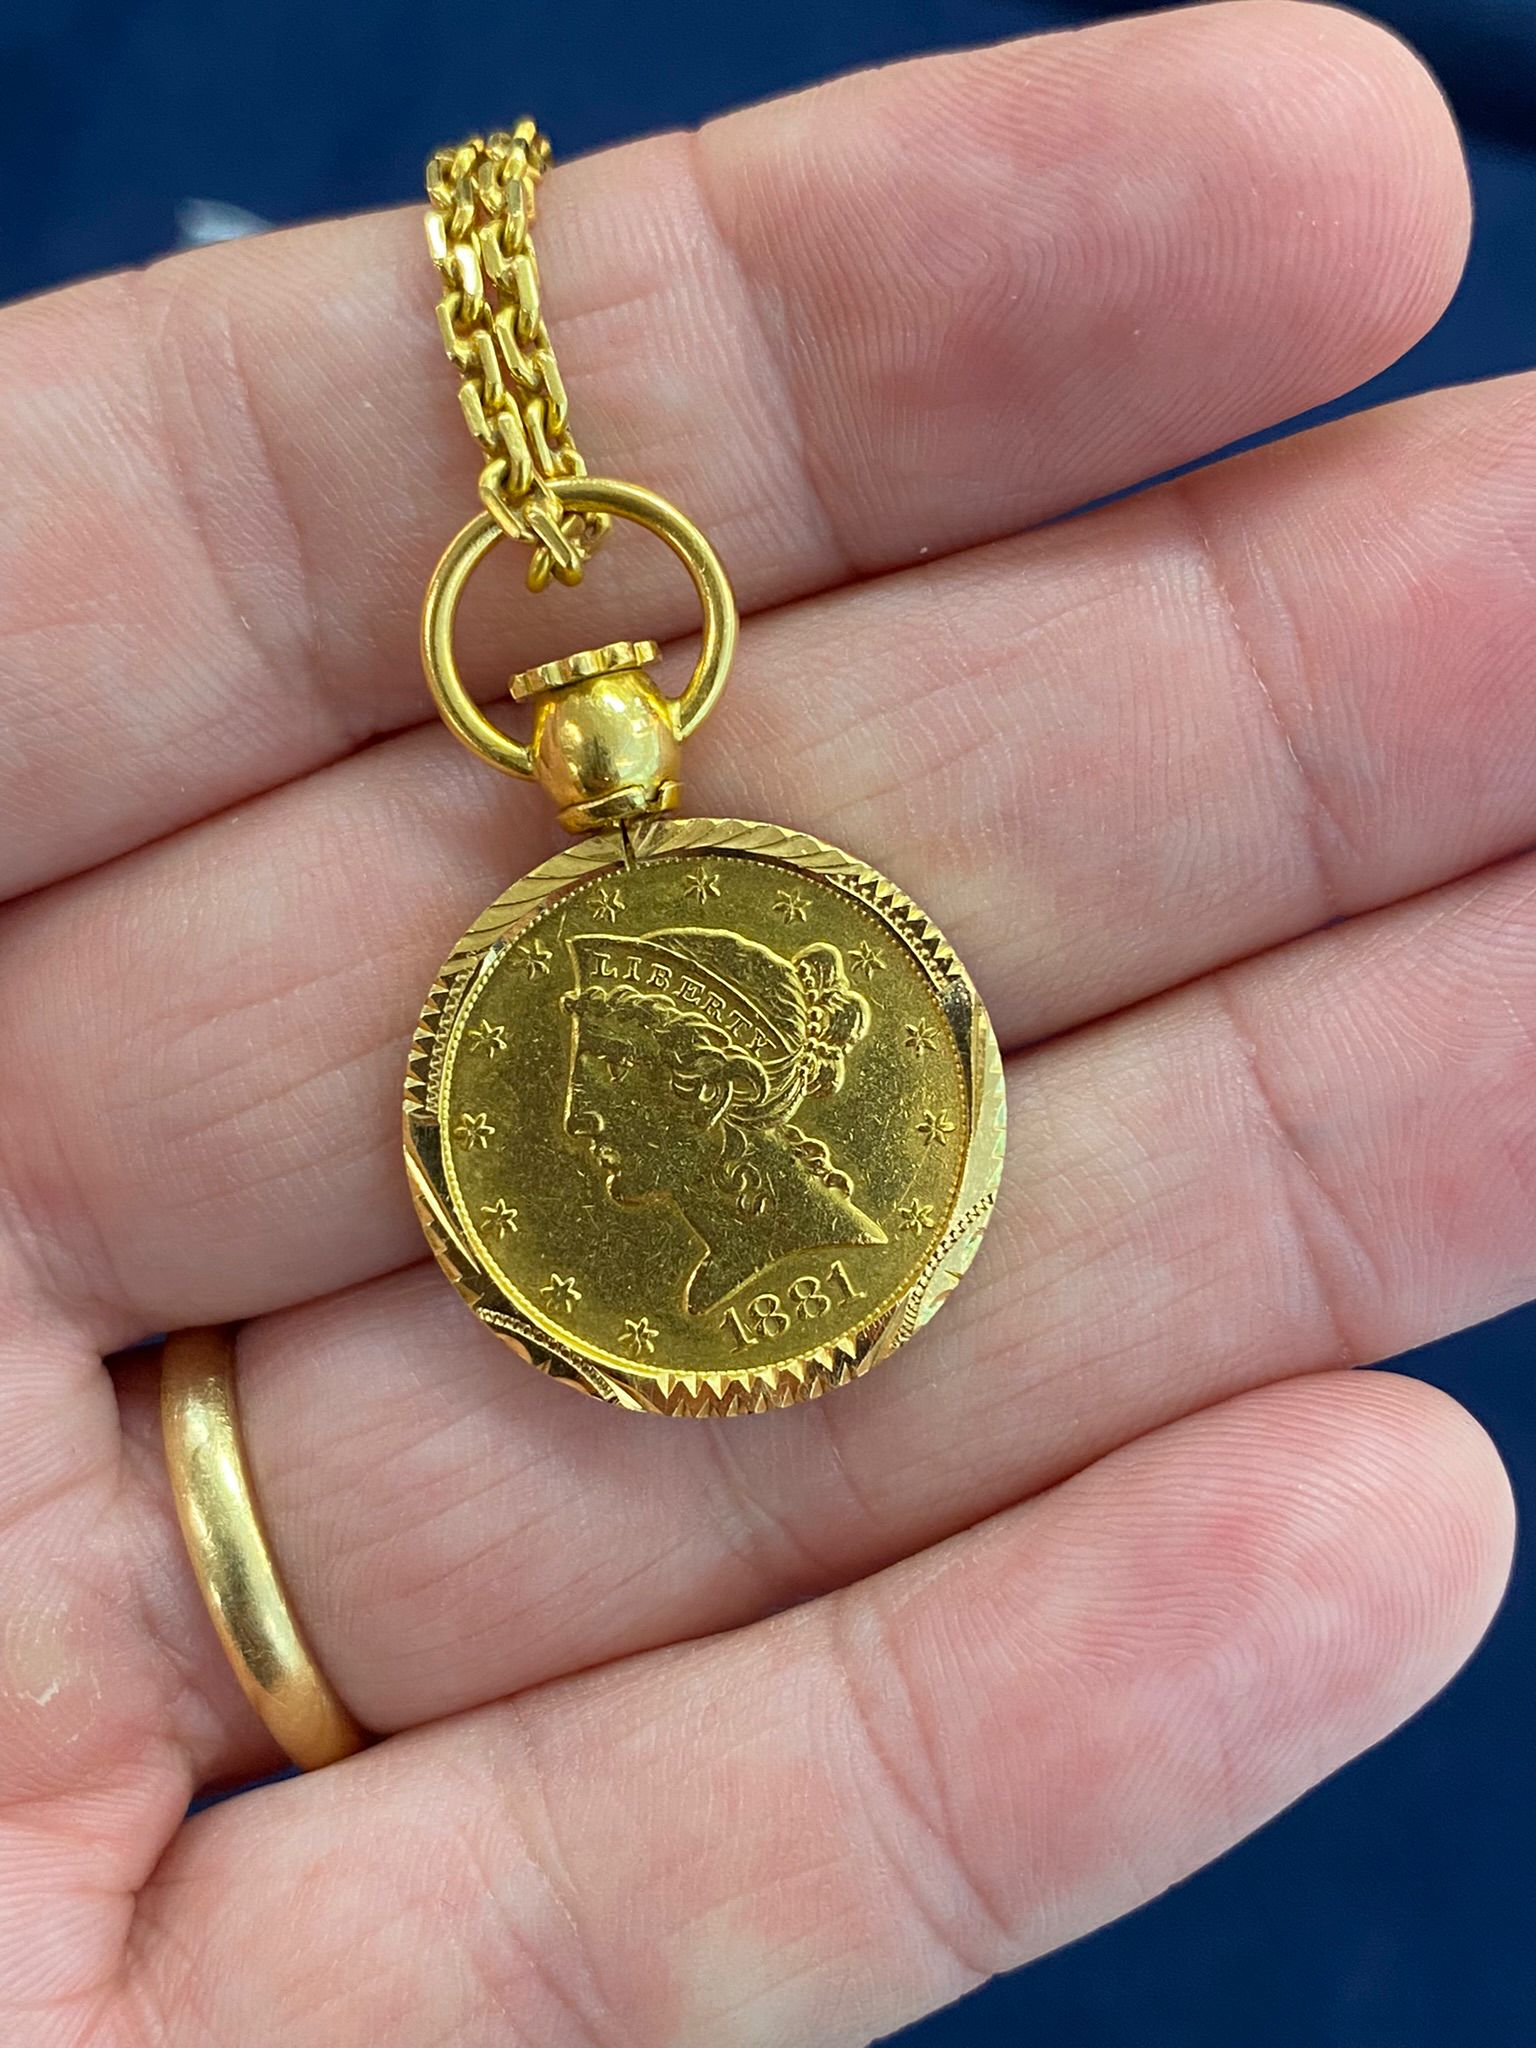 A UNITED STATES GOLD COIN PENDANT ON CHAIN - Image 6 of 7